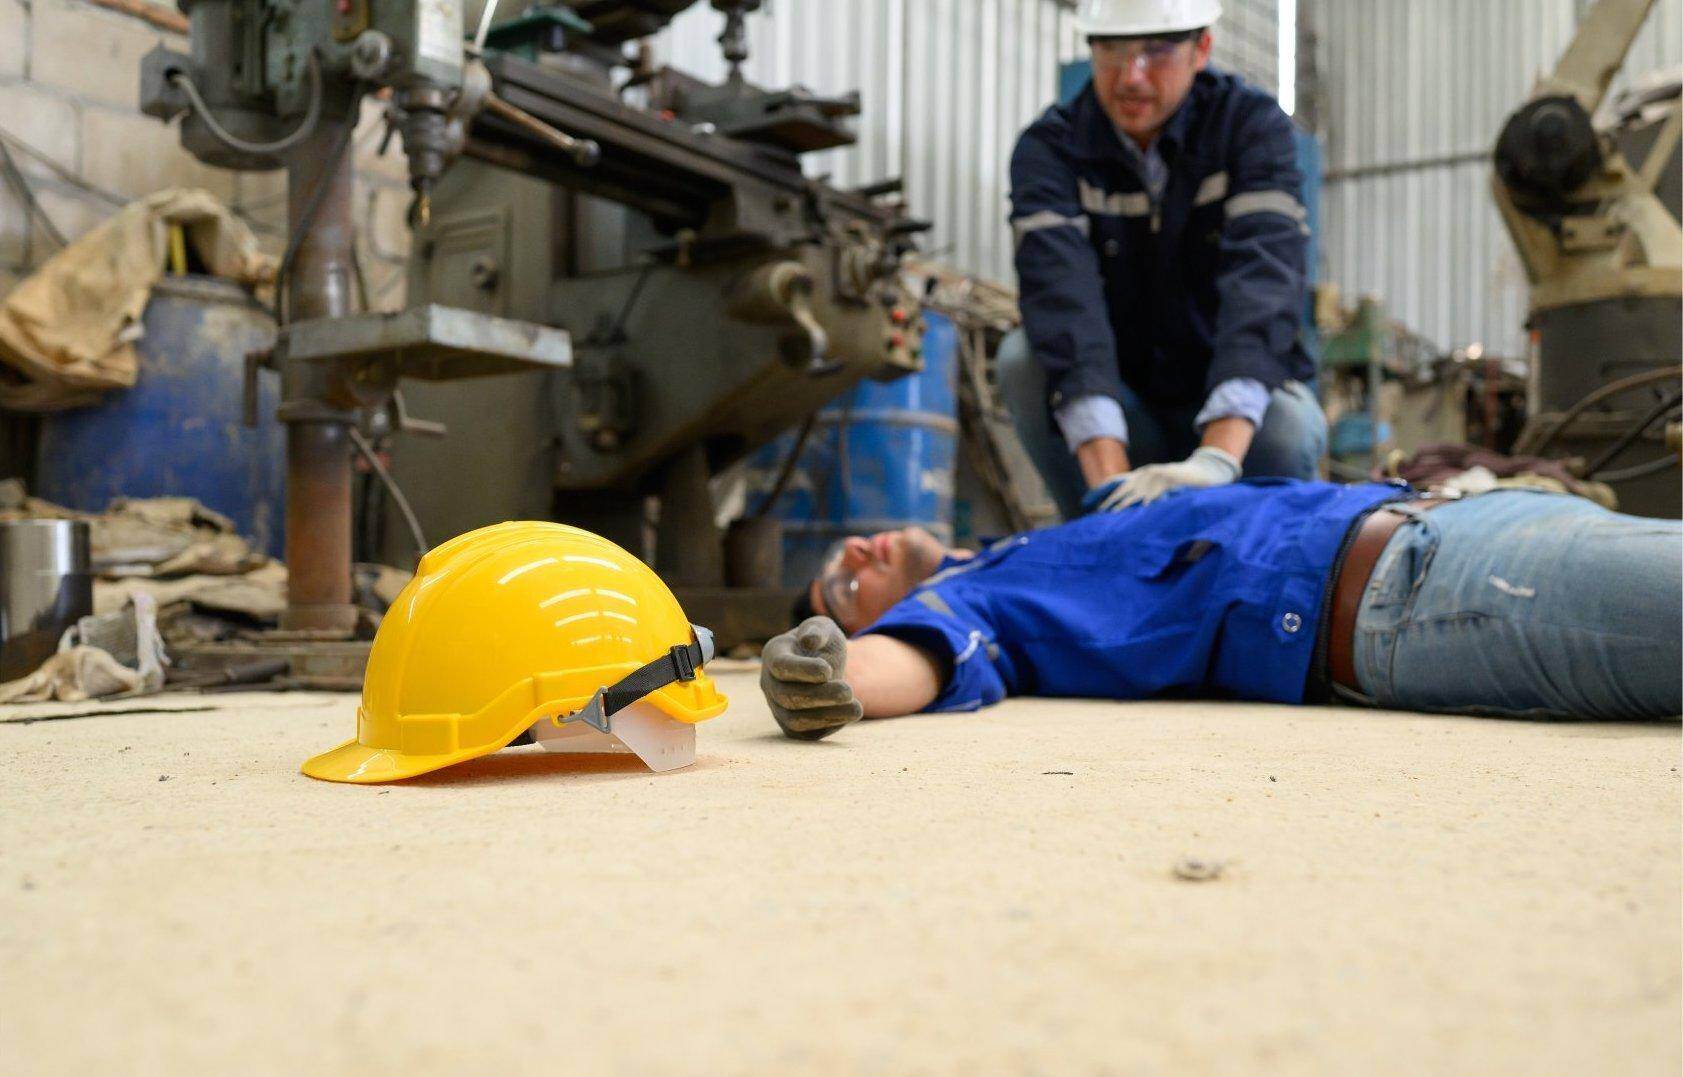 An unconscious man who has been injured on the job who will file for workers compensation in St Simons, Georgia